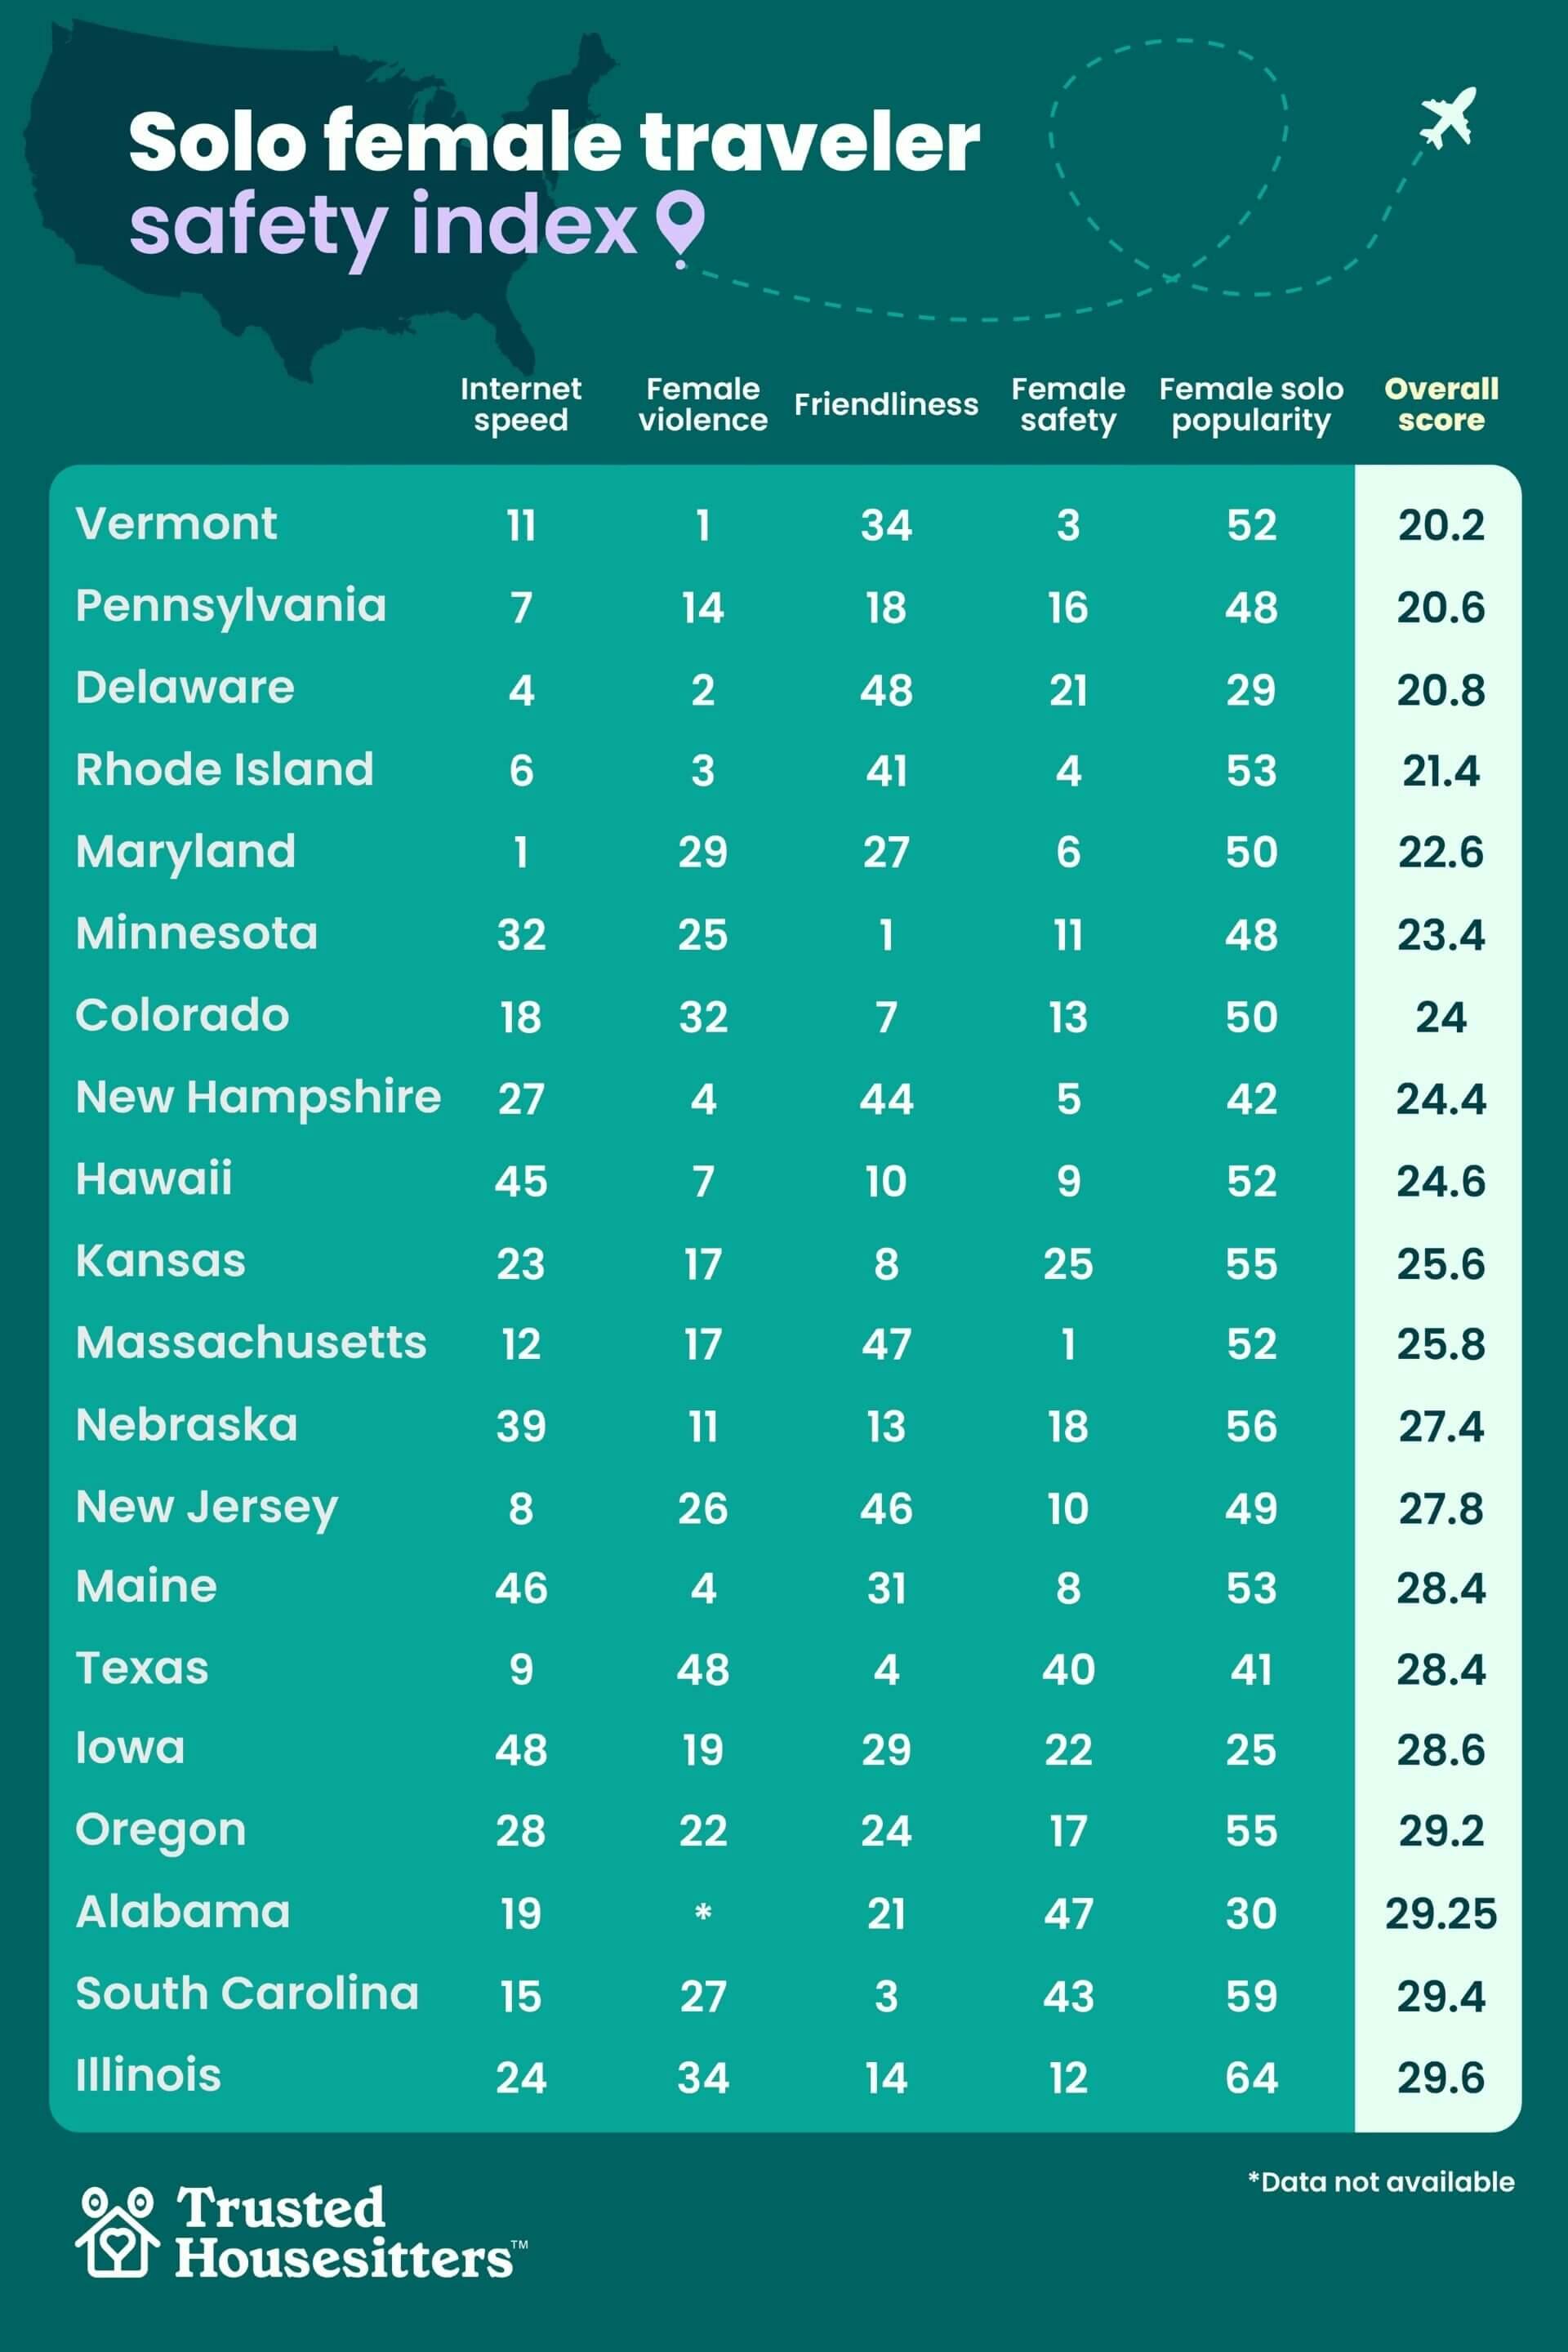 A table showing the TrustedHousesitters Solo female travel safety index.